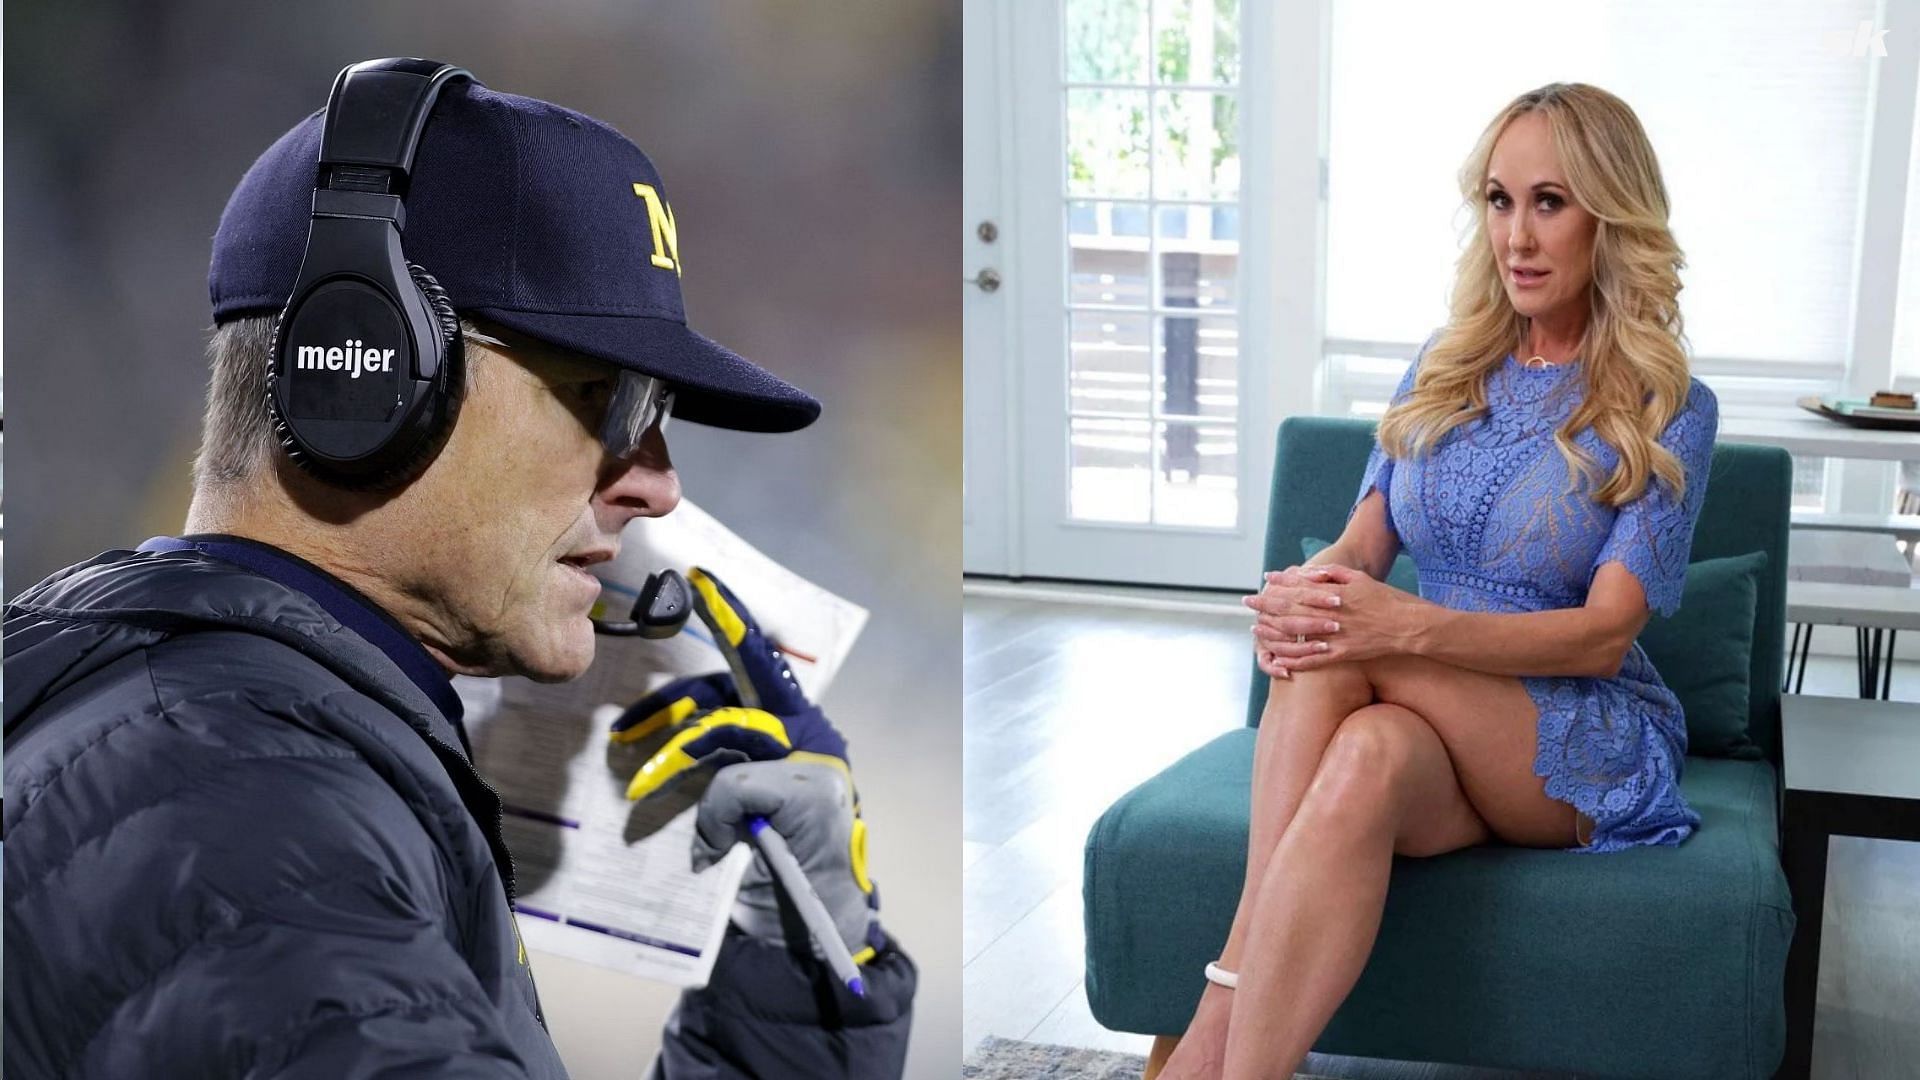 Adult Star Brandi Love Makes Her Stance Clear On Jim Harbaugh S Michigan Sign Stealing Scandal